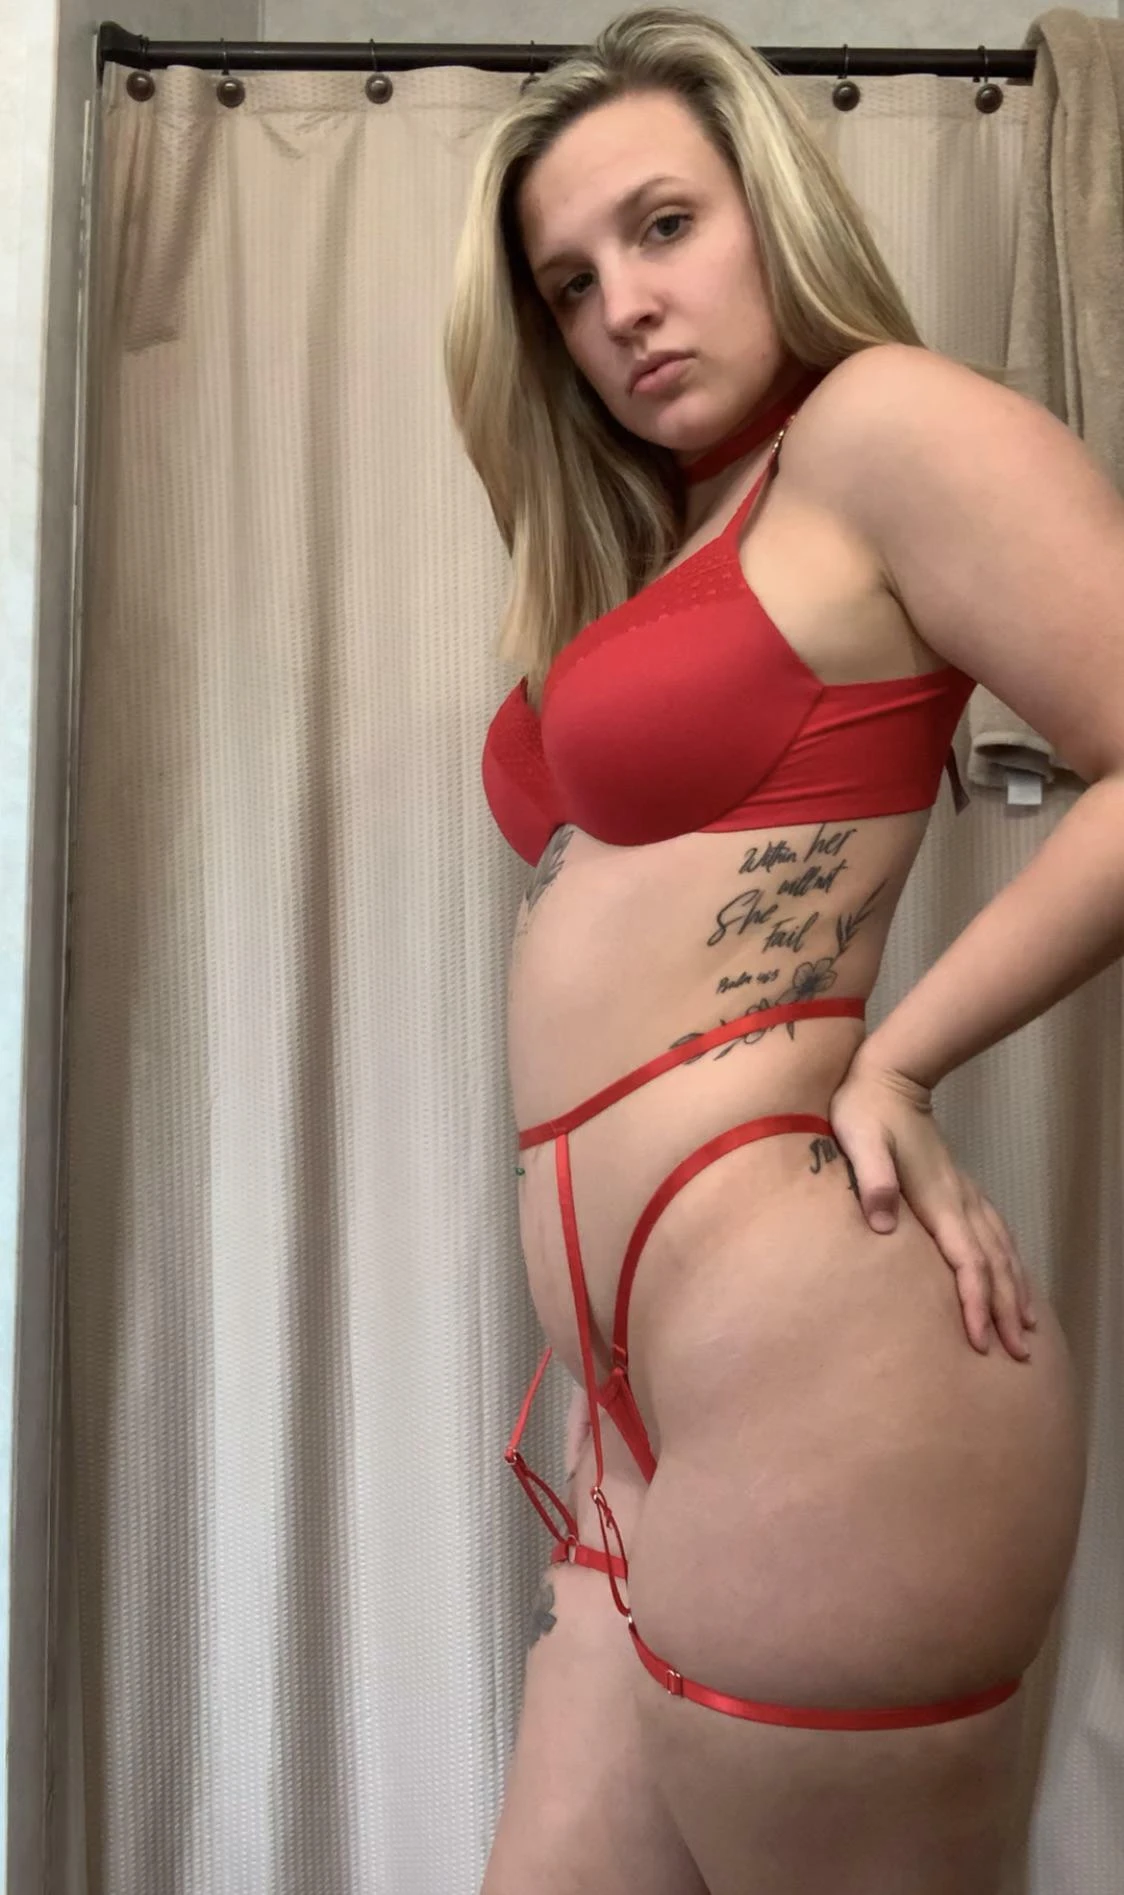 Want to fuck this thick 26 year old?